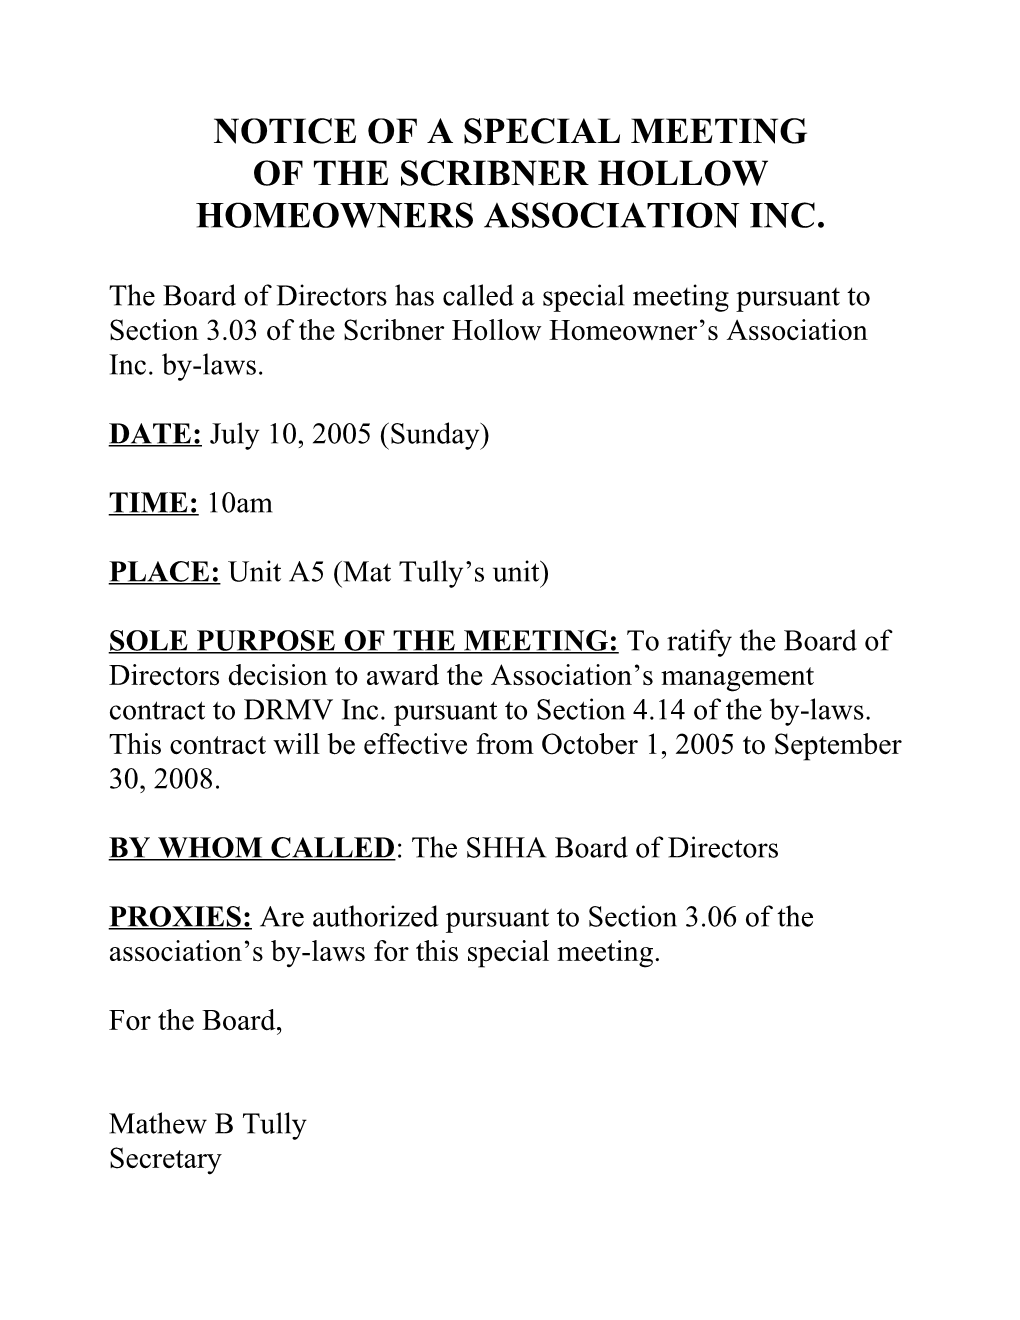 Notice of a Special Meeting